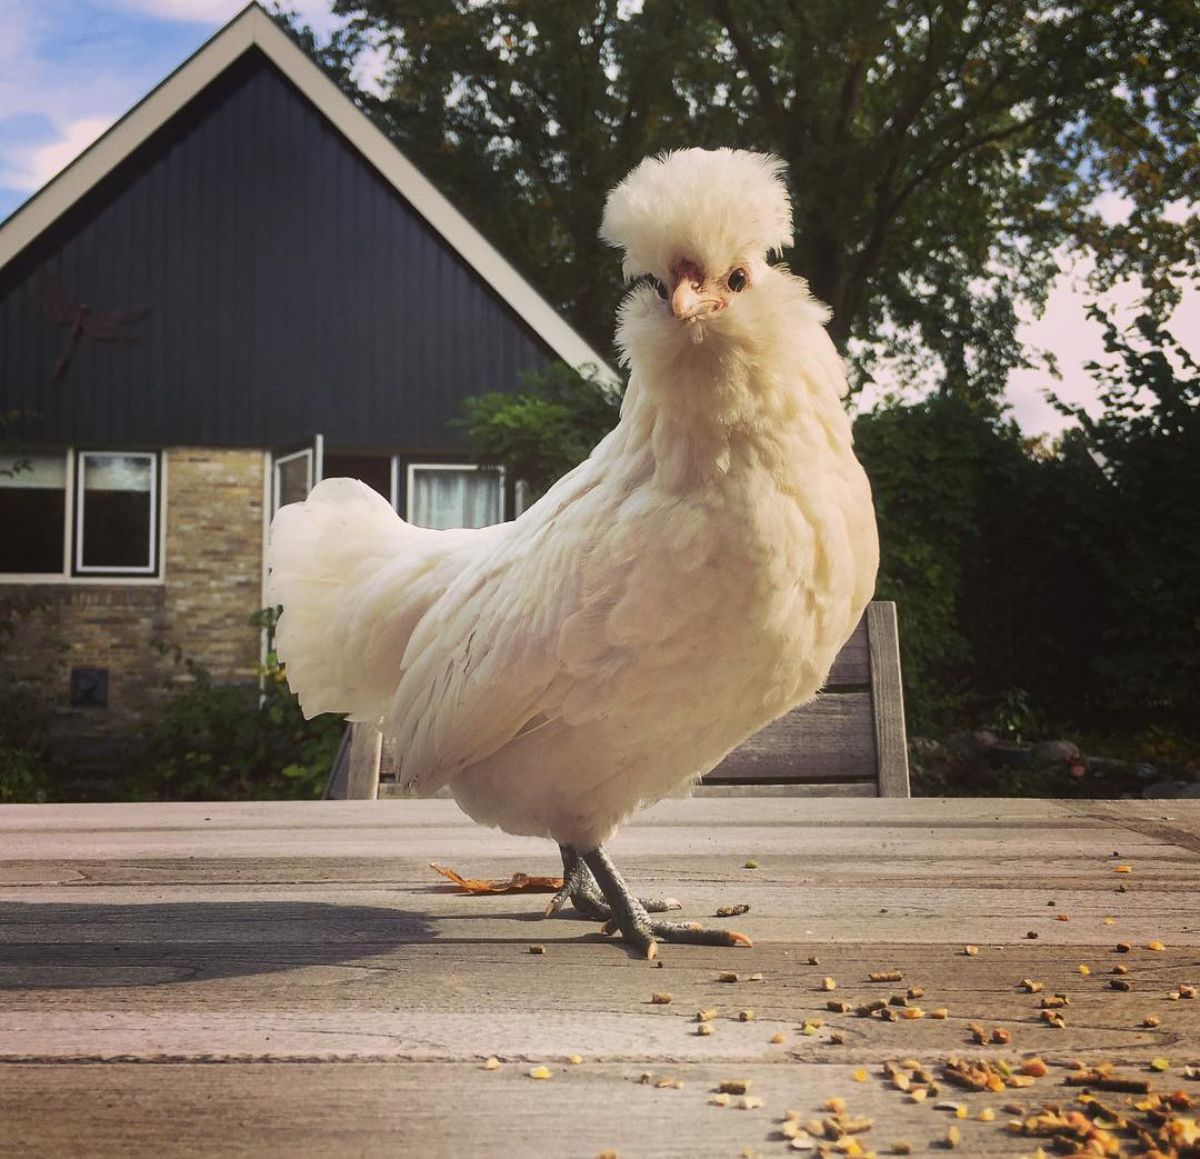 An adorable white Barbu de Watermael hen standing on a wooden table.